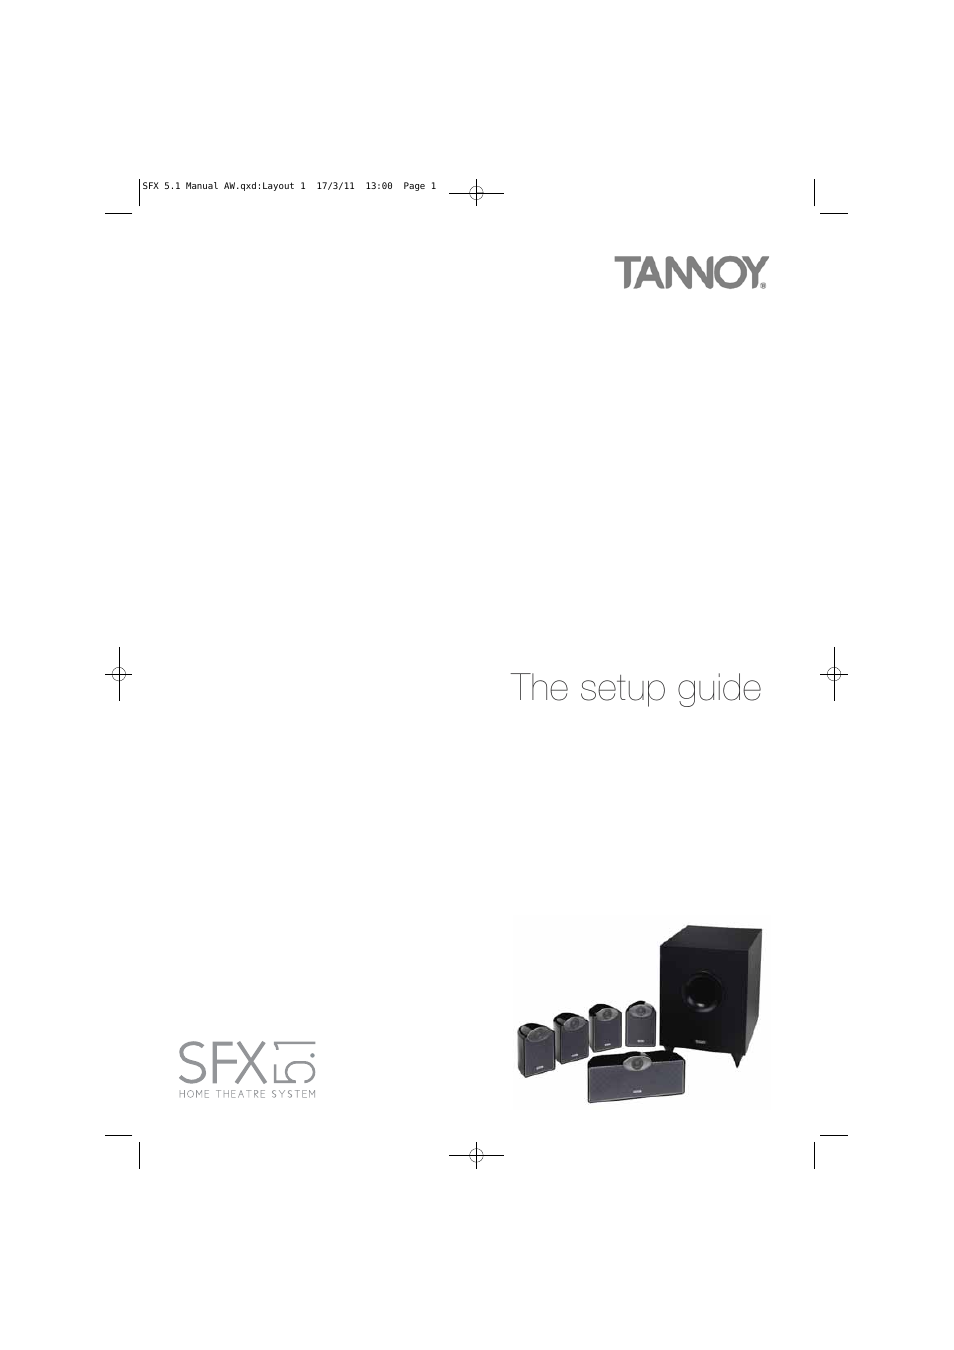 home theatre system SFX 5.1